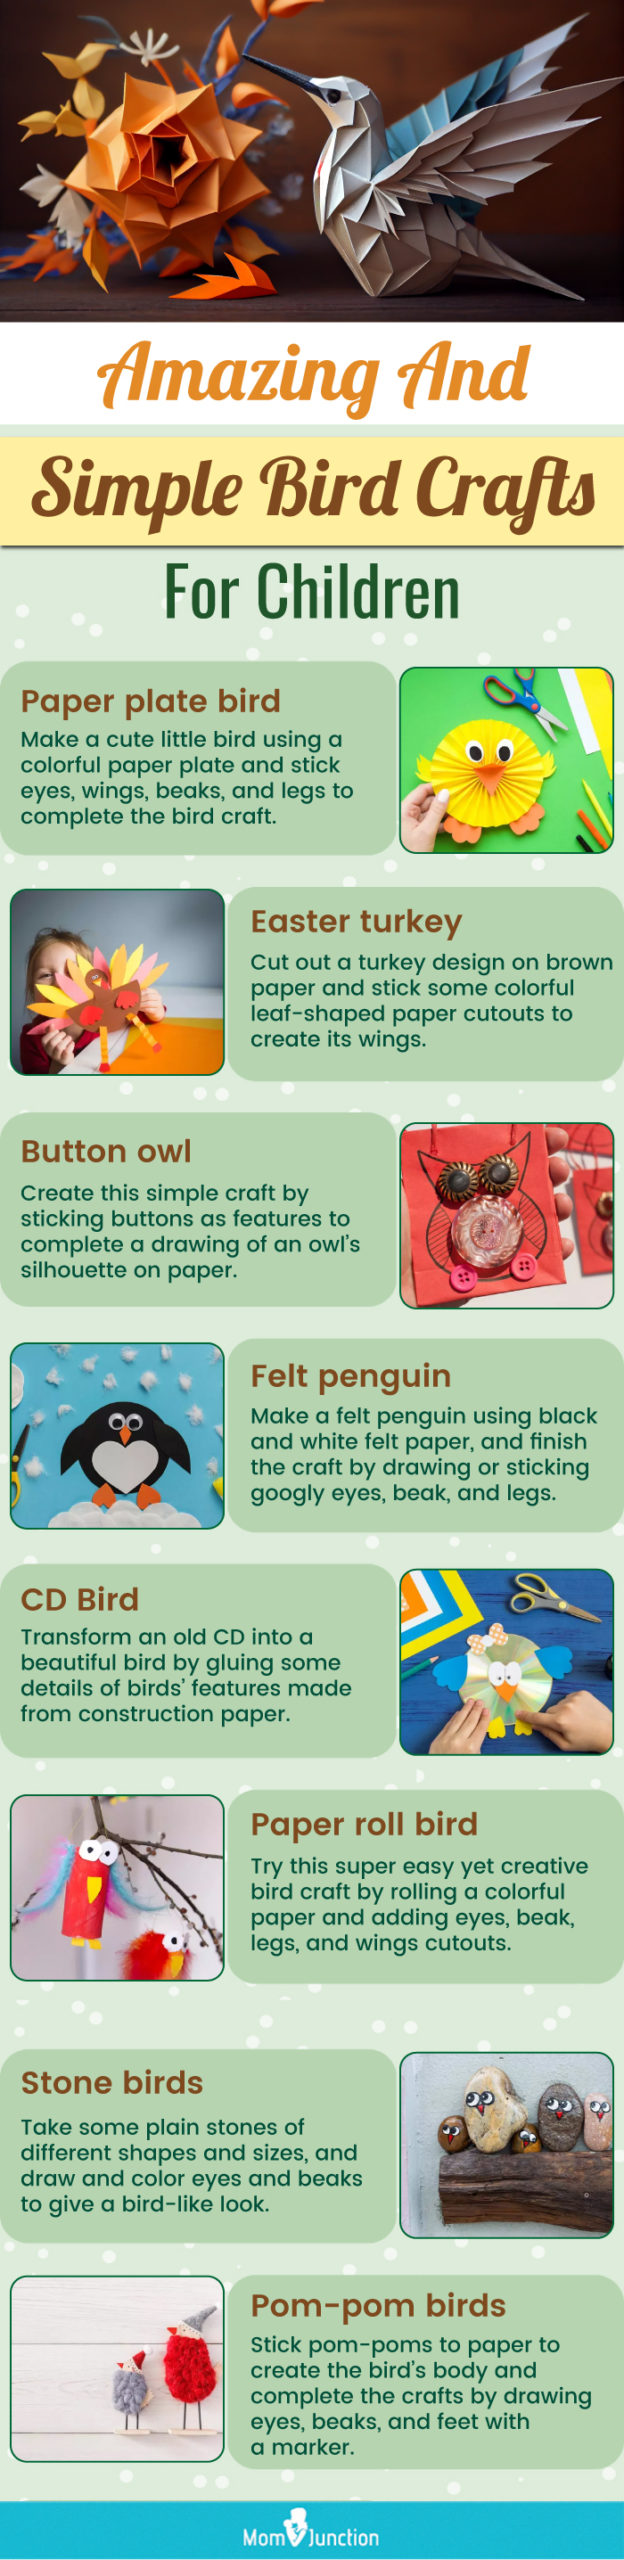 amazing and simple bird crafts for children (infographic)